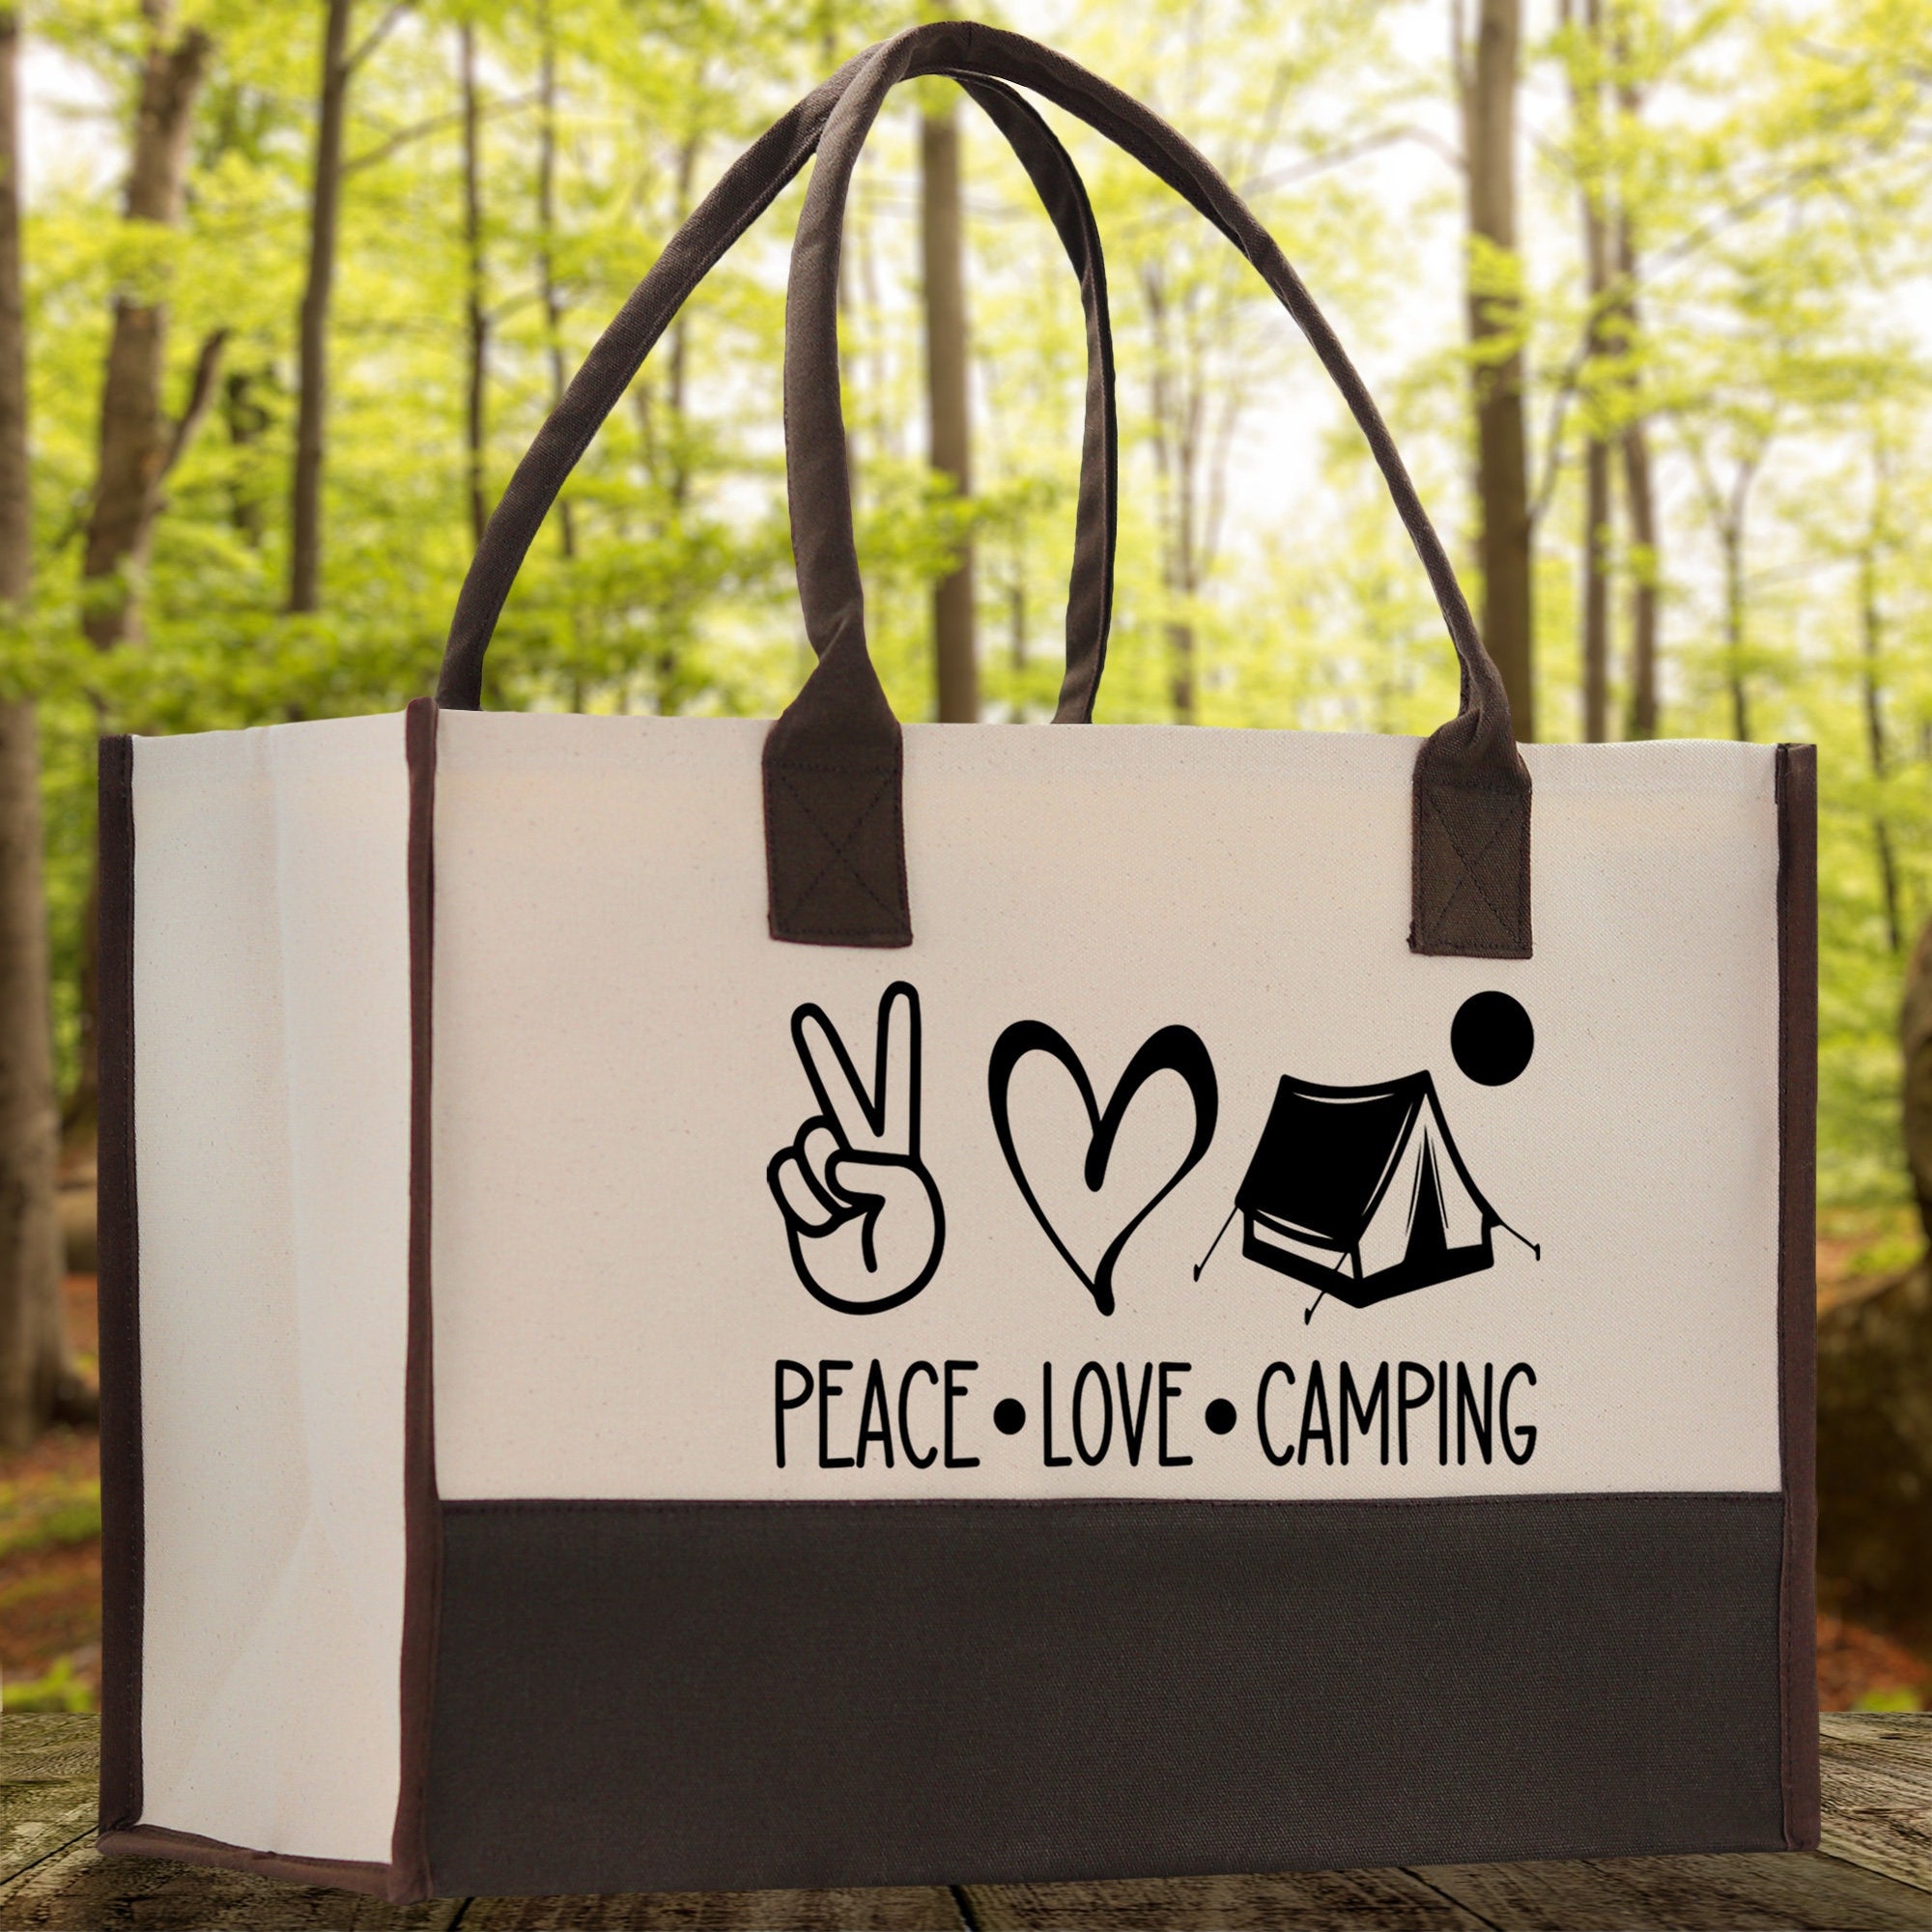 Peace Love Camping Cotton Canvas Chic Tote Bag Camping Tote Camping Lover Gift Tote Bag Outdoor Tote Weekender Tote Multipurpose Camper Tote